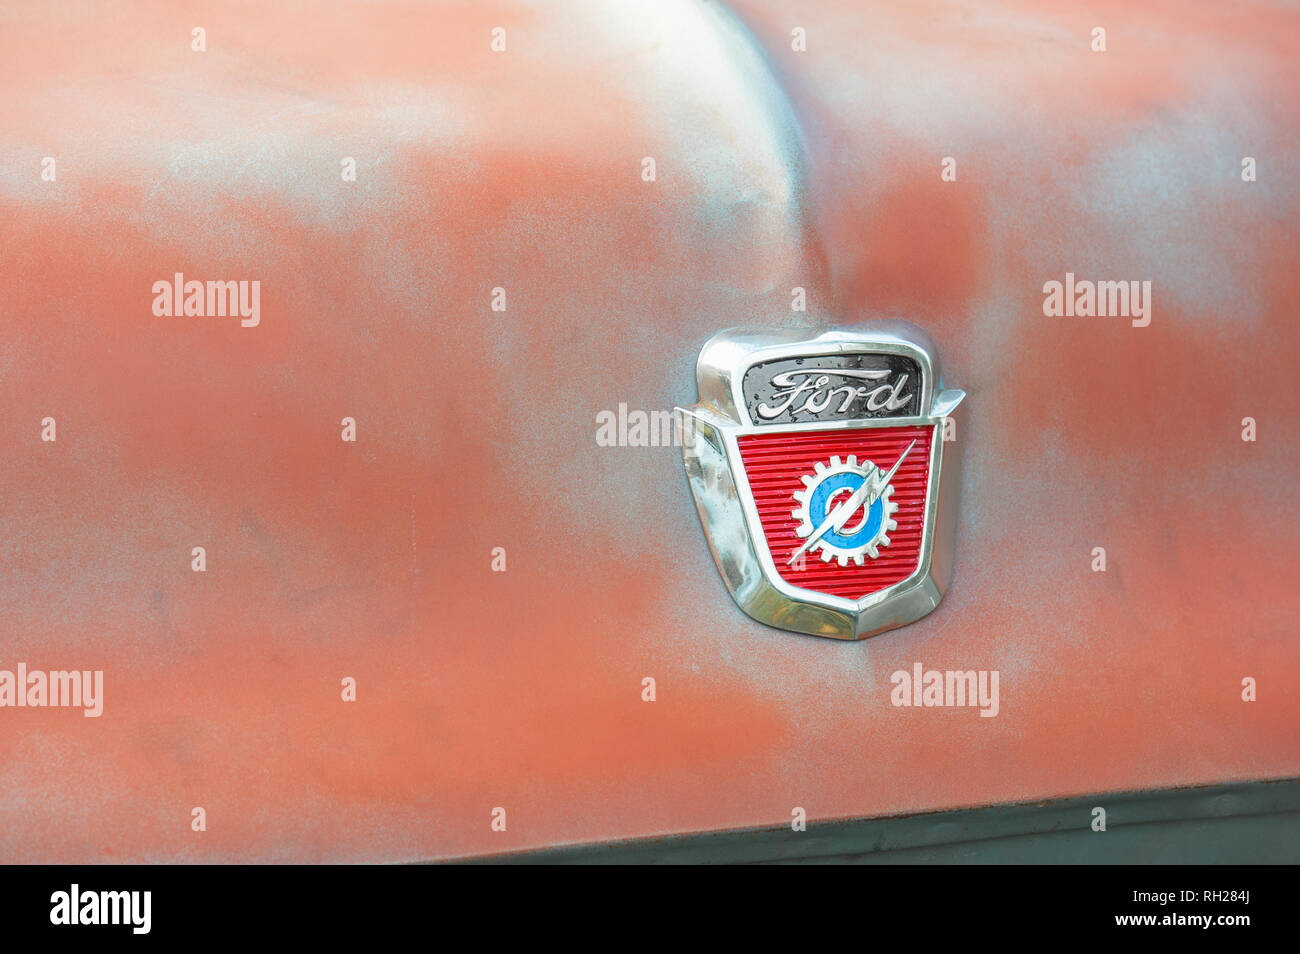 Hook, UK - January 1, 2019:  Close-up vehicle badge insignia on the hood of an old Ford F-100 pickup truck. Stock Photo